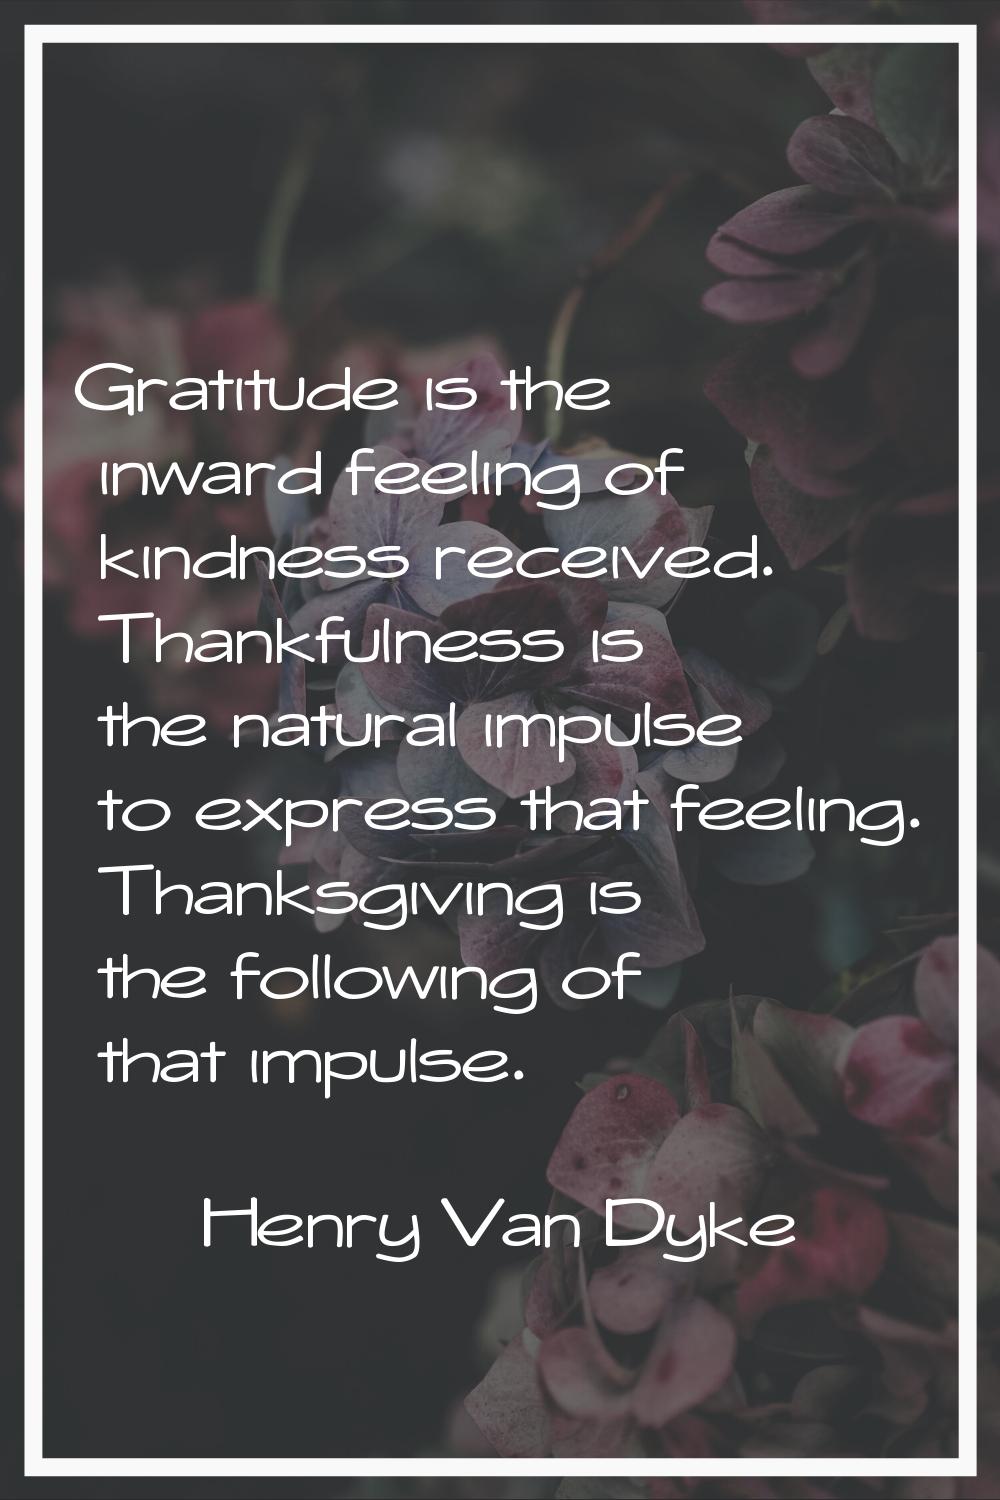 Gratitude is the inward feeling of kindness received. Thankfulness is the natural impulse to expres